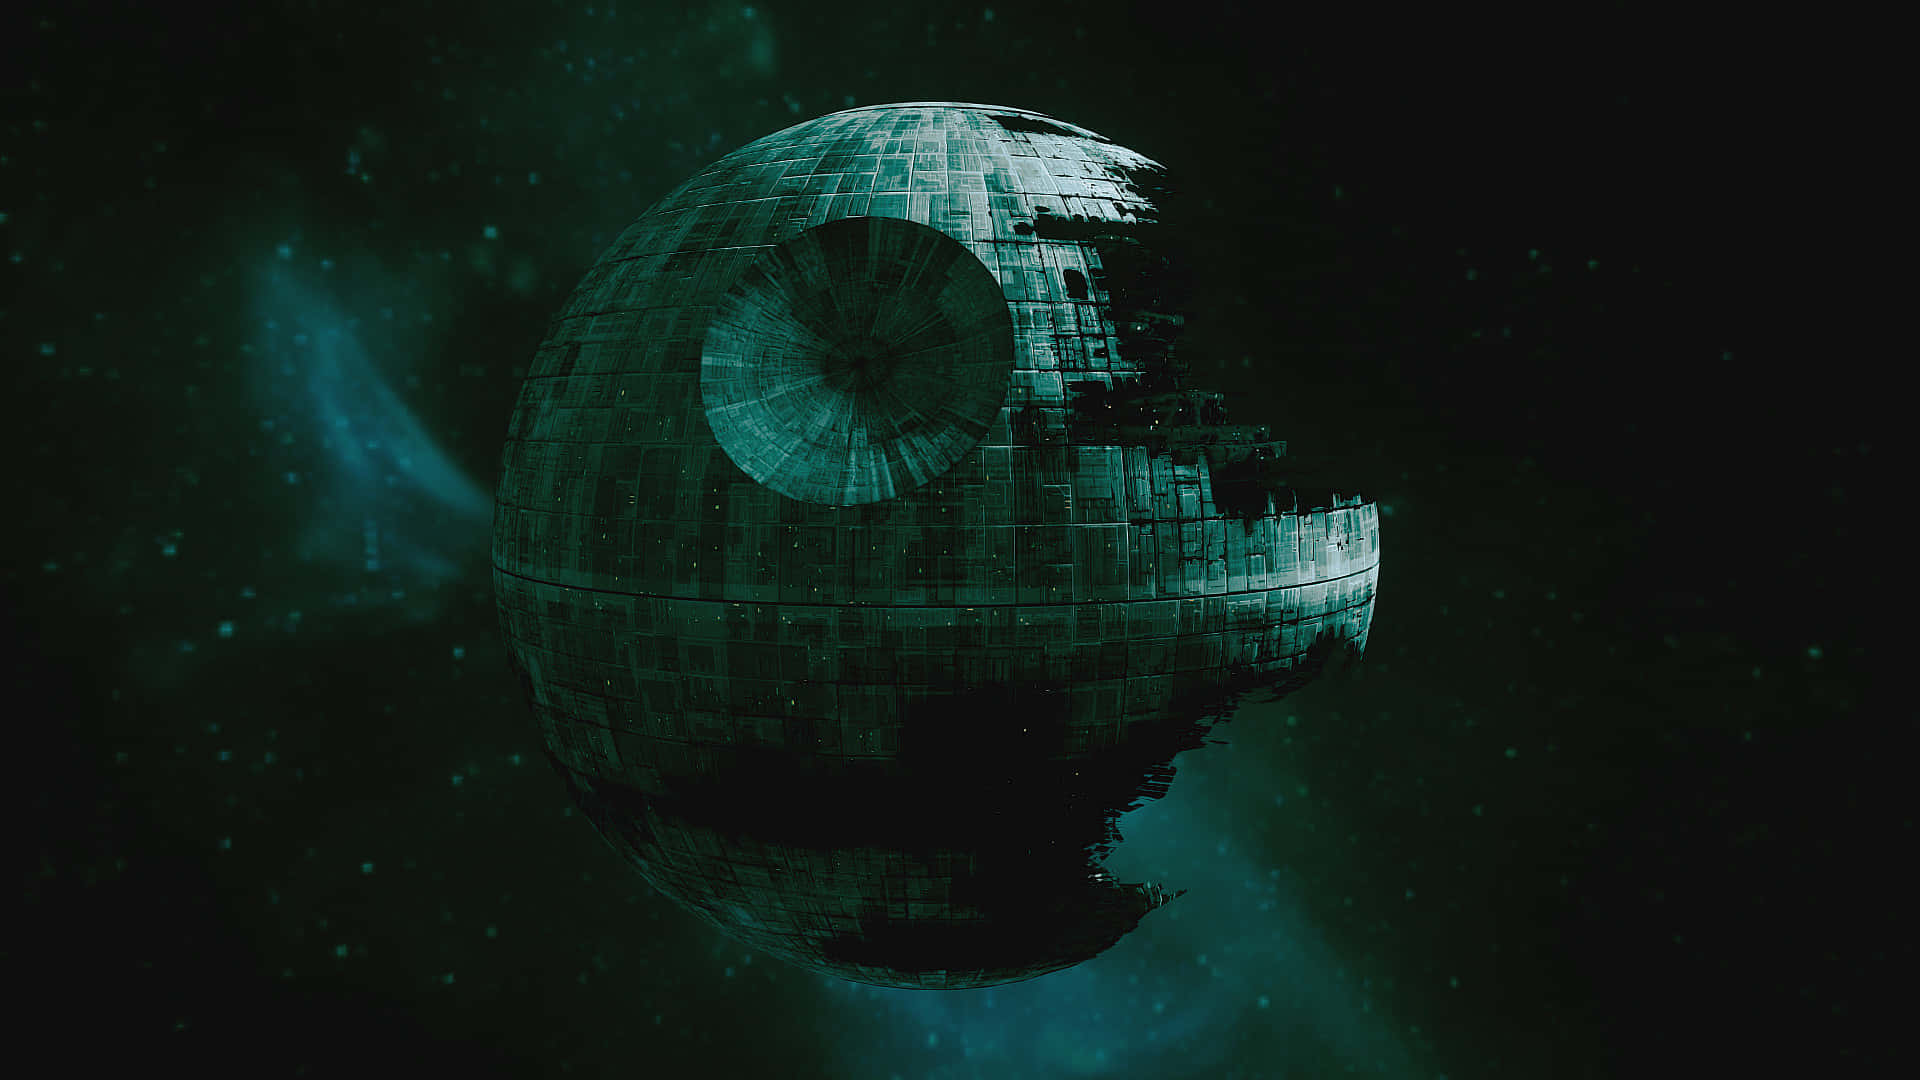 The Death Star II - Destruction on a Grand Scale" Wallpaper